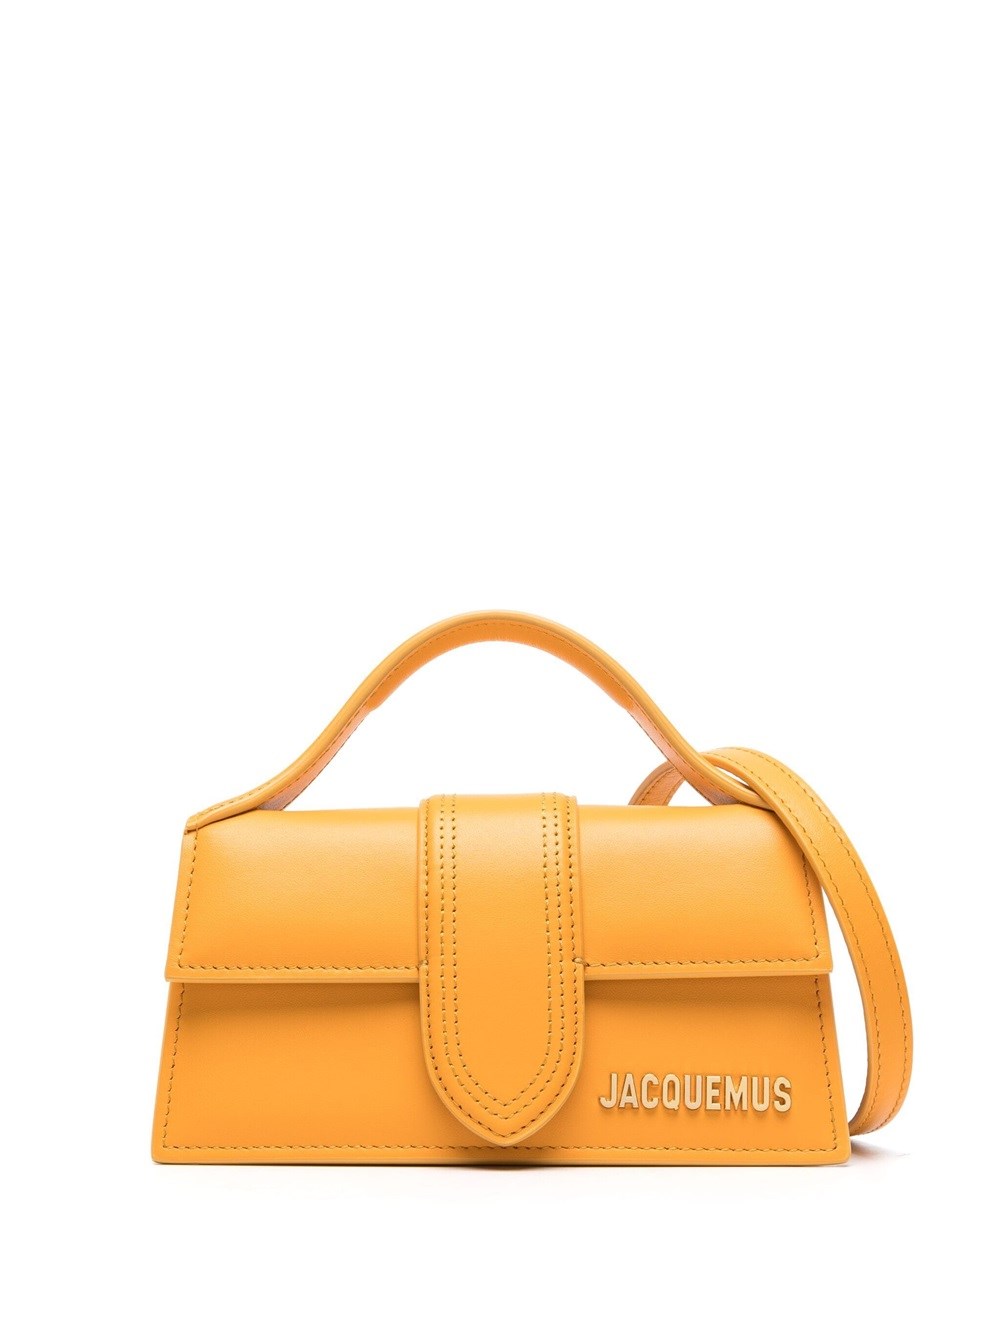 Jacquemus Le Bambino Leather Tote Bag In Yellow & Orange